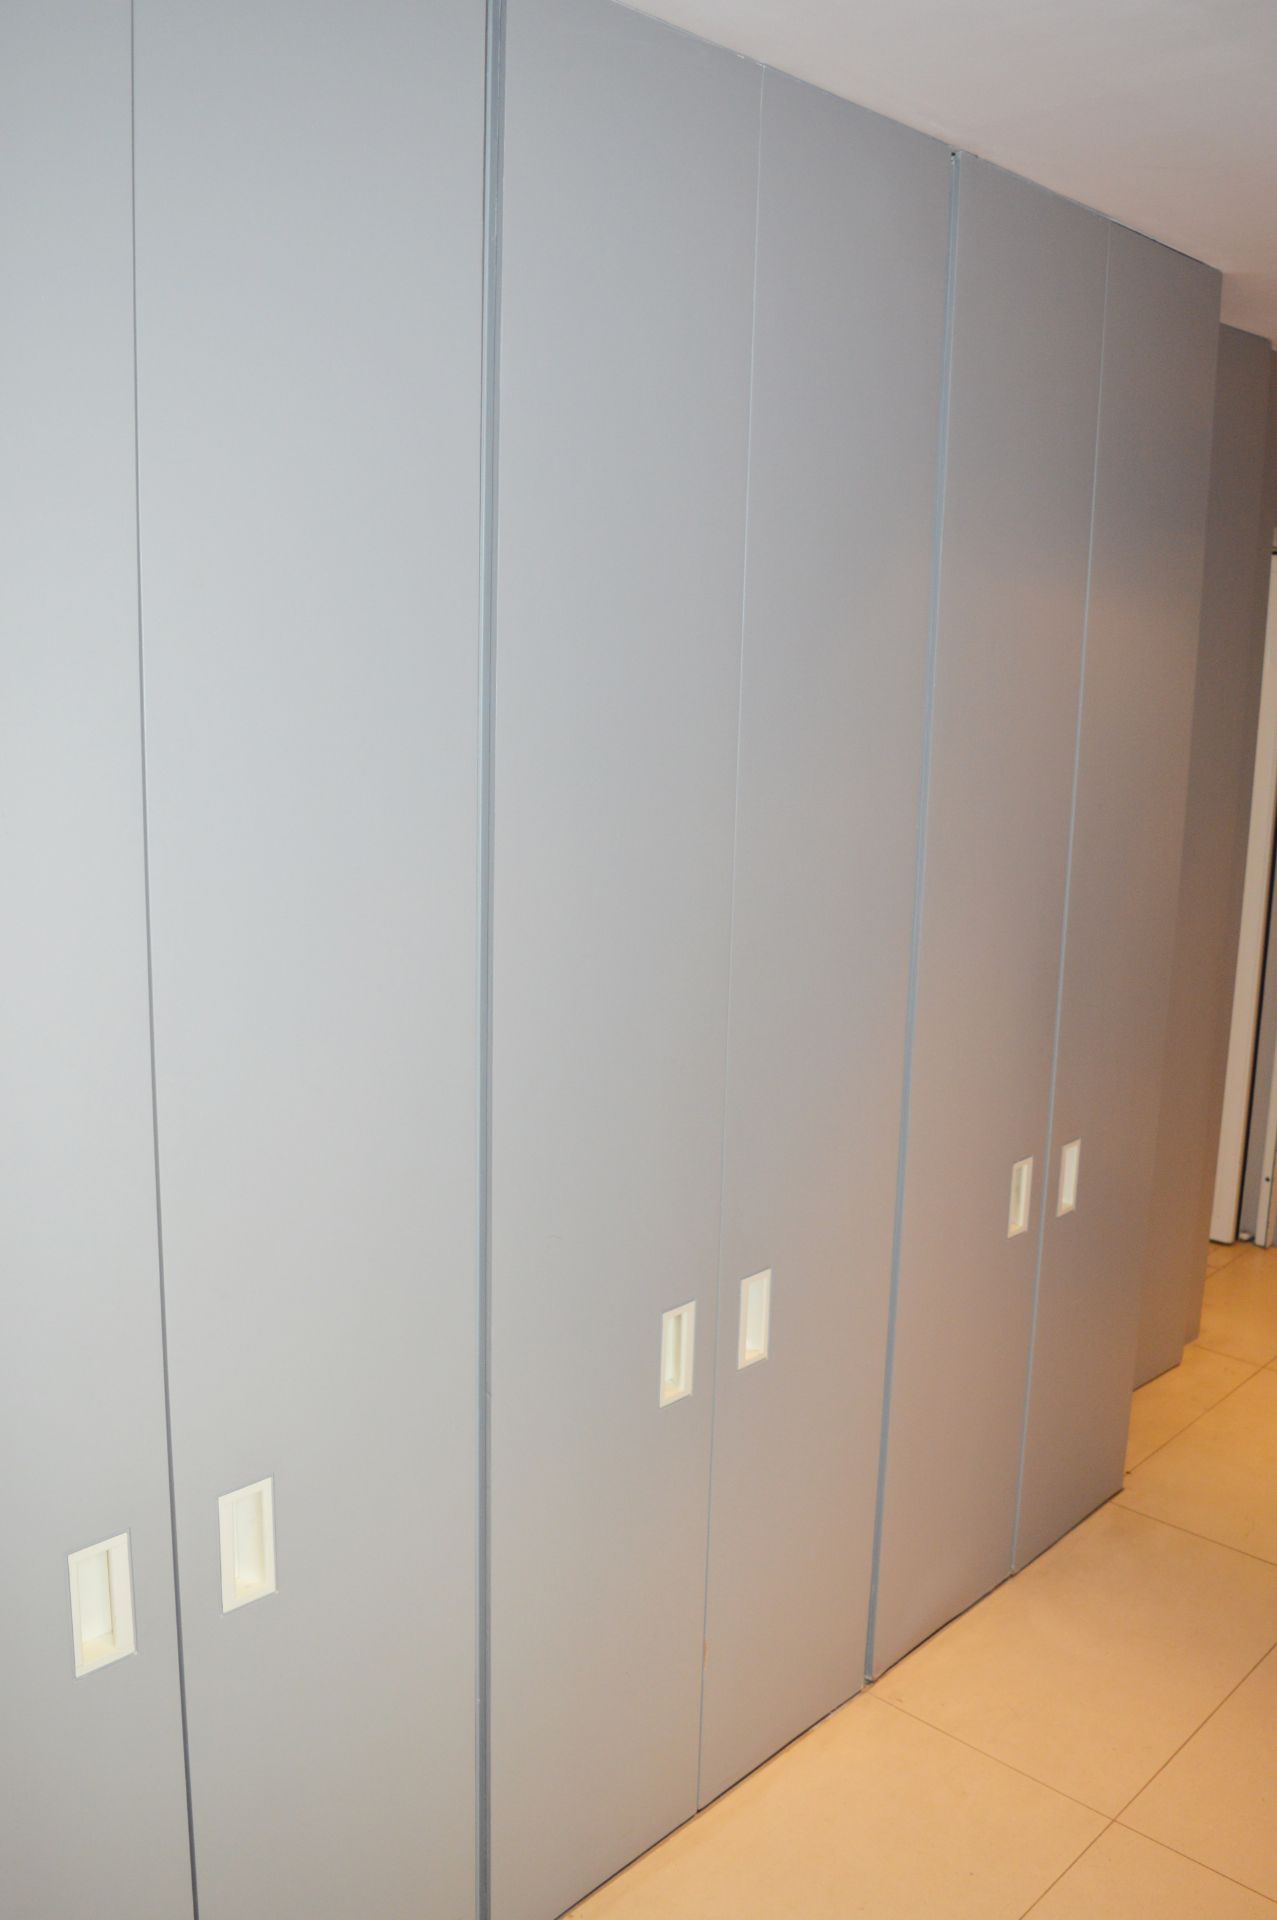 7 x Storage Cupboard Doors With Integrated Handles - Large Substantial Size Covering an Area of 12ft - Image 2 of 8